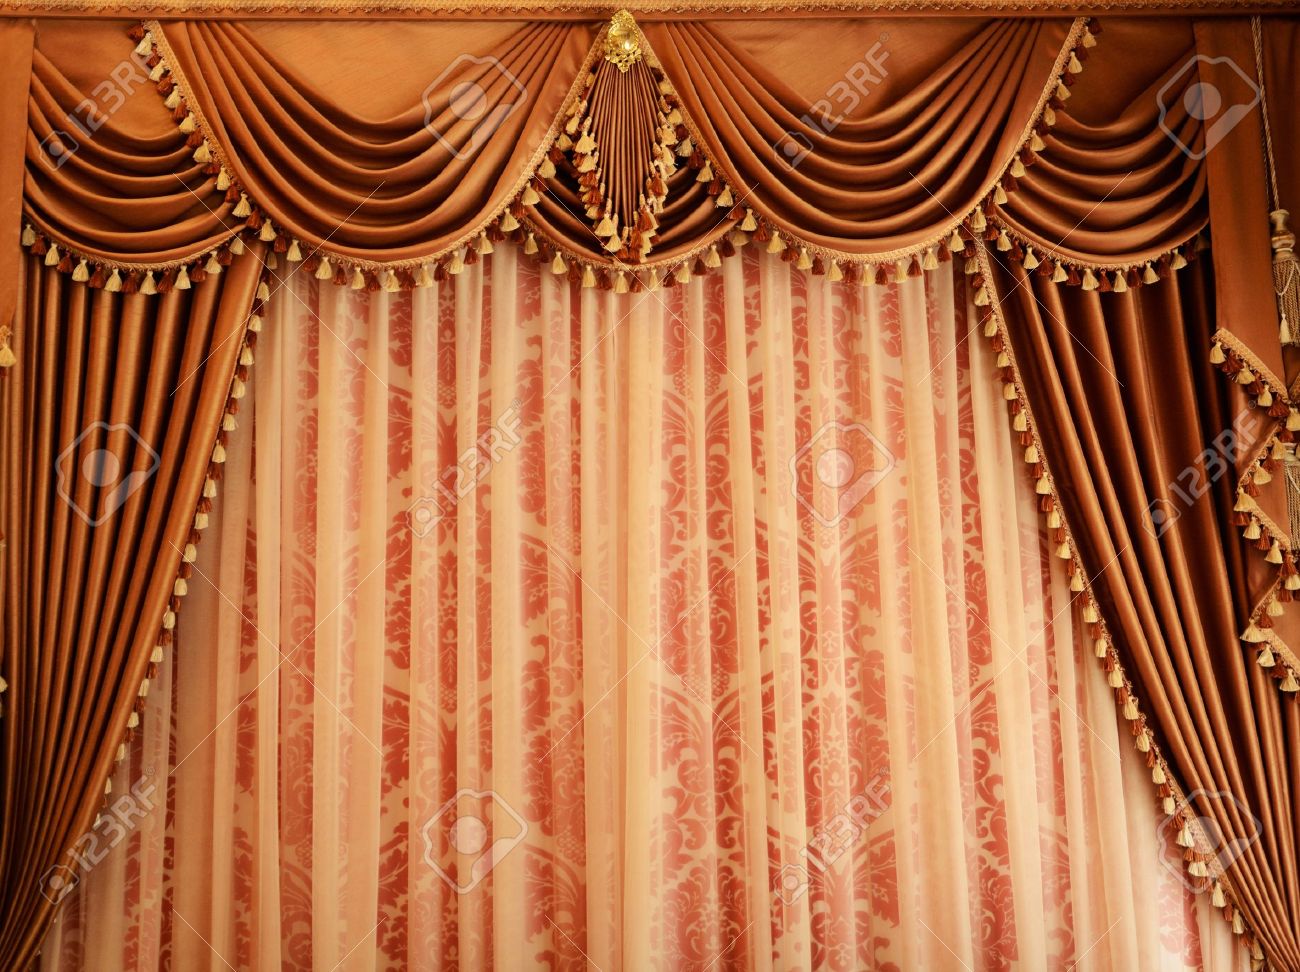 Beautiful Vintage Curtain Background Stock Photo Picture And